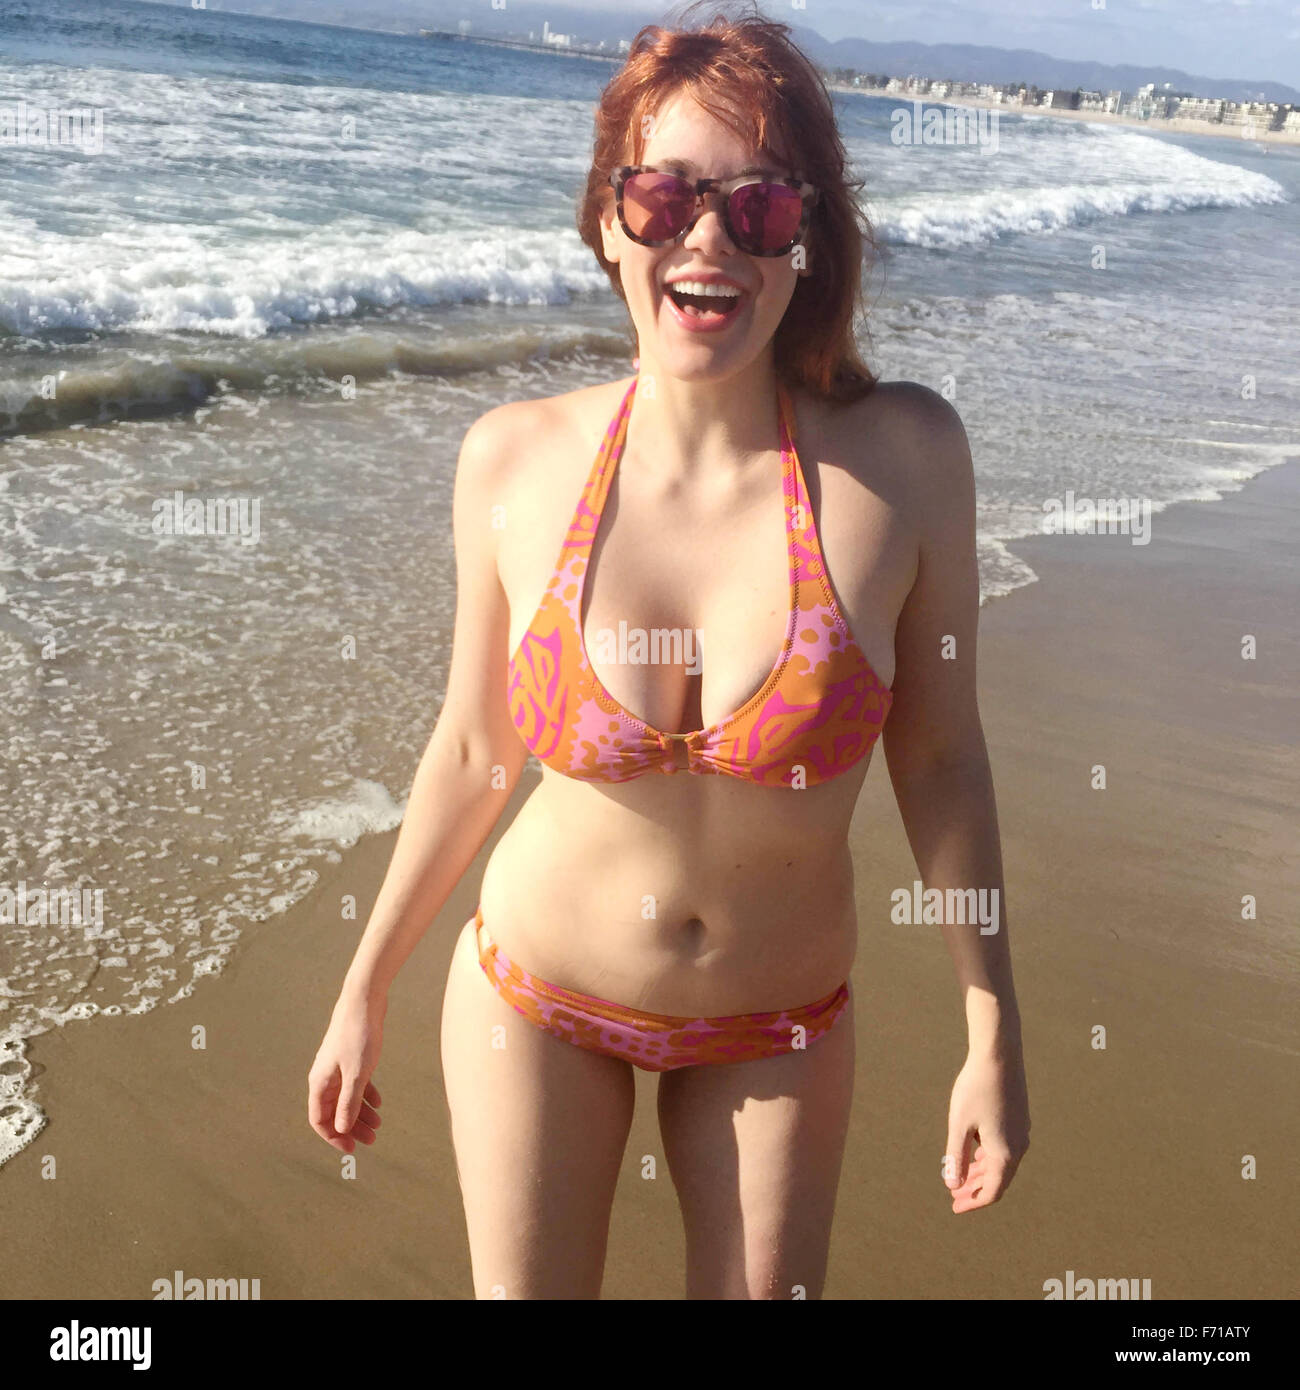 Maitland Ward returns to her hotel to wash off the green body paint from  her 'Orion Slave Girl' Comic-Con cosplay Featuring: Maitland Ward Where:  San Diego, California, United States When: 11 Jul